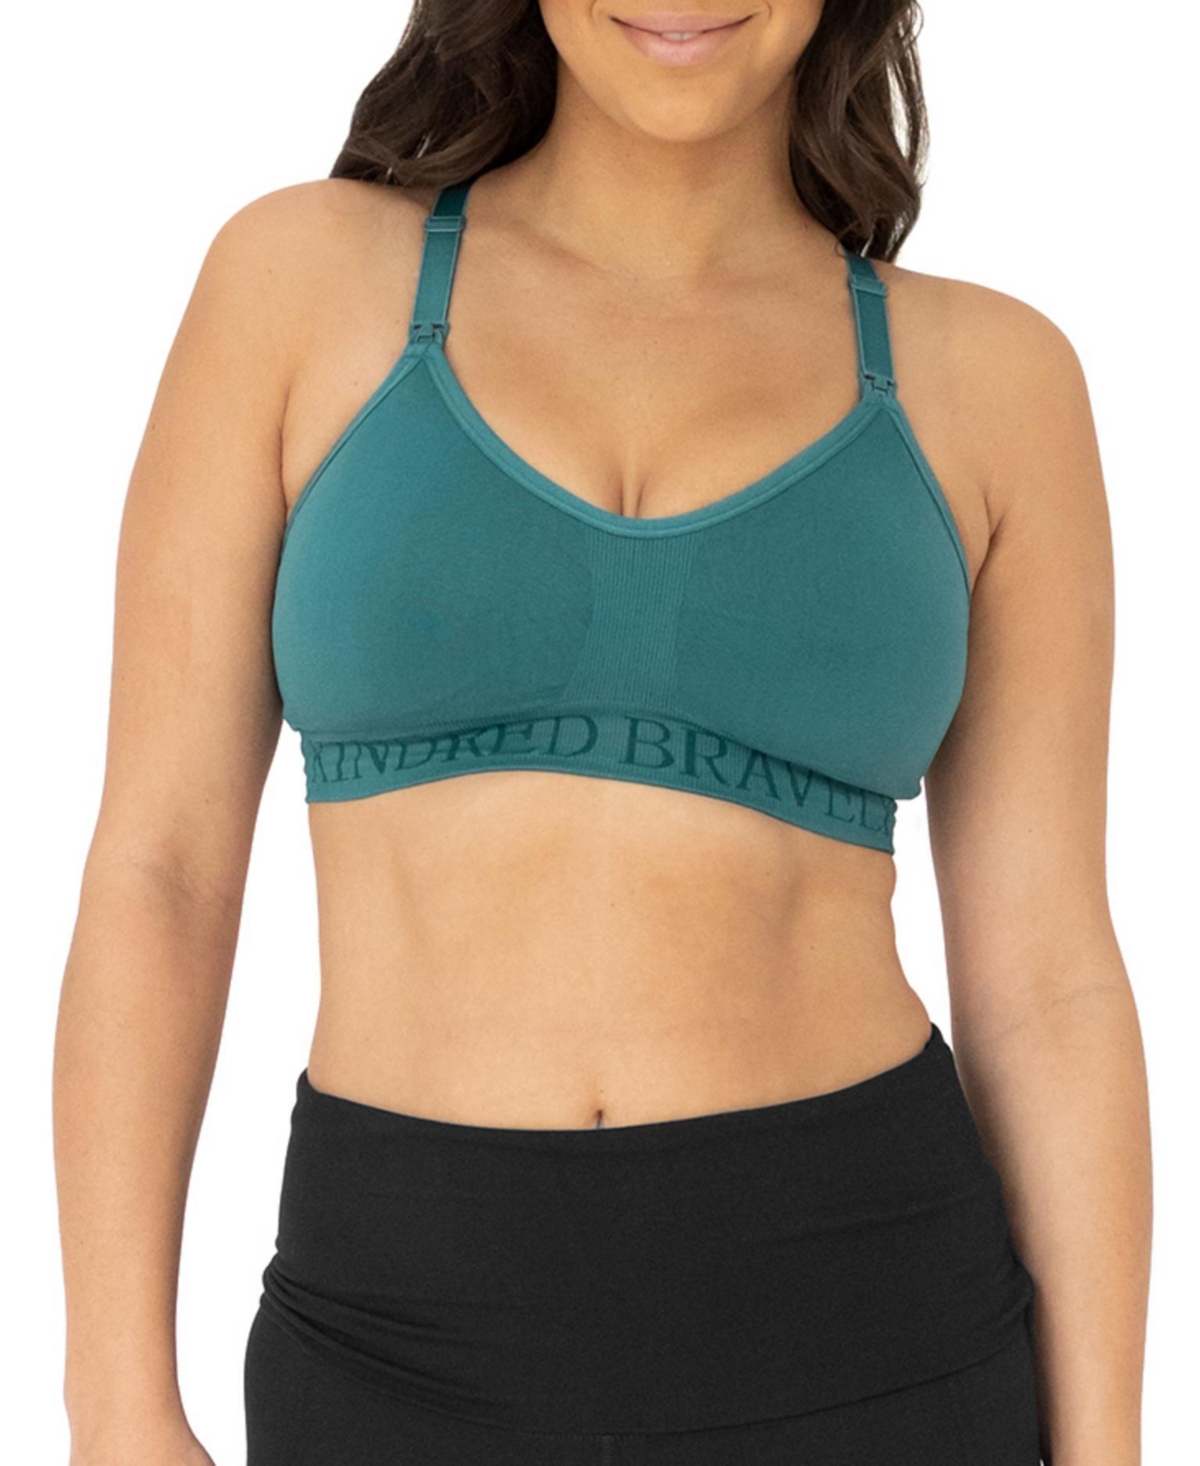 Women's Busty Sublime Hands-Free Pumping & Nursing Sports Bra - Fits Sizes 28E-40I - Teal